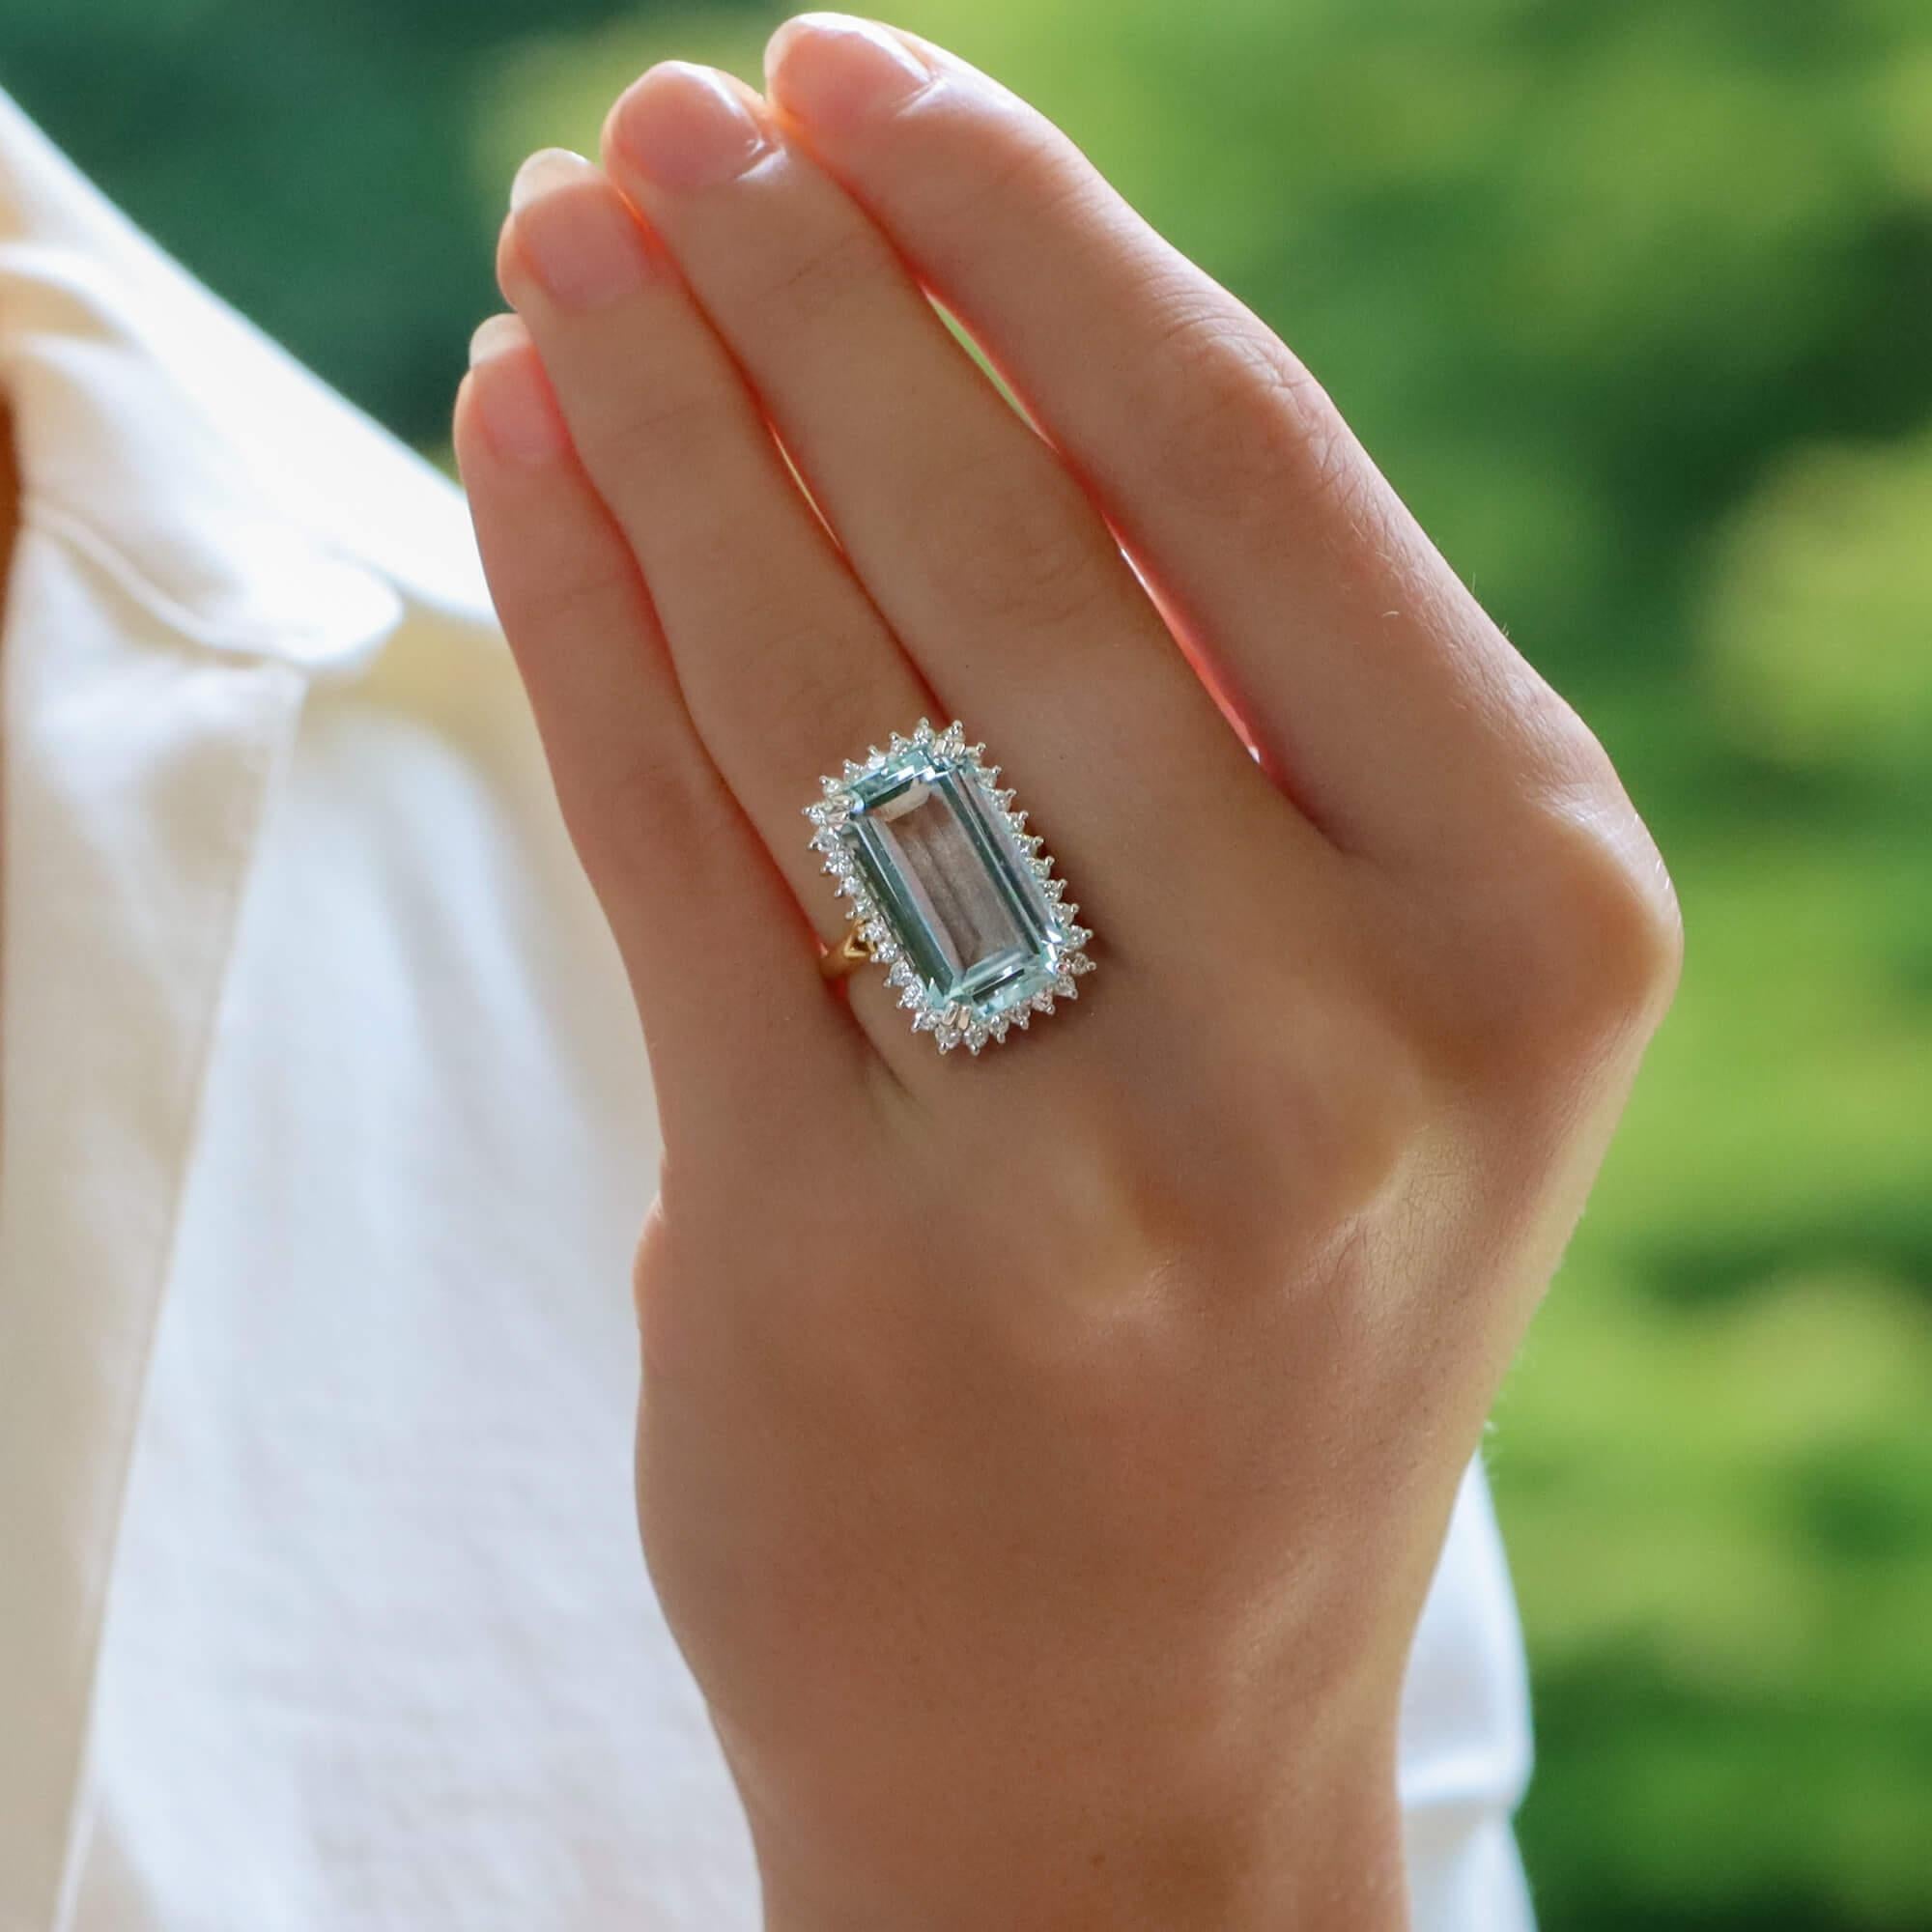 A beautiful contemporary aquamarine and diamond cocktail ring set in 18k yellow and white gold.

This beautiful piece is predominantly set with a sky blue coloured elongated emerald cut aquamarine which is double four claw set to centre. Surrounding